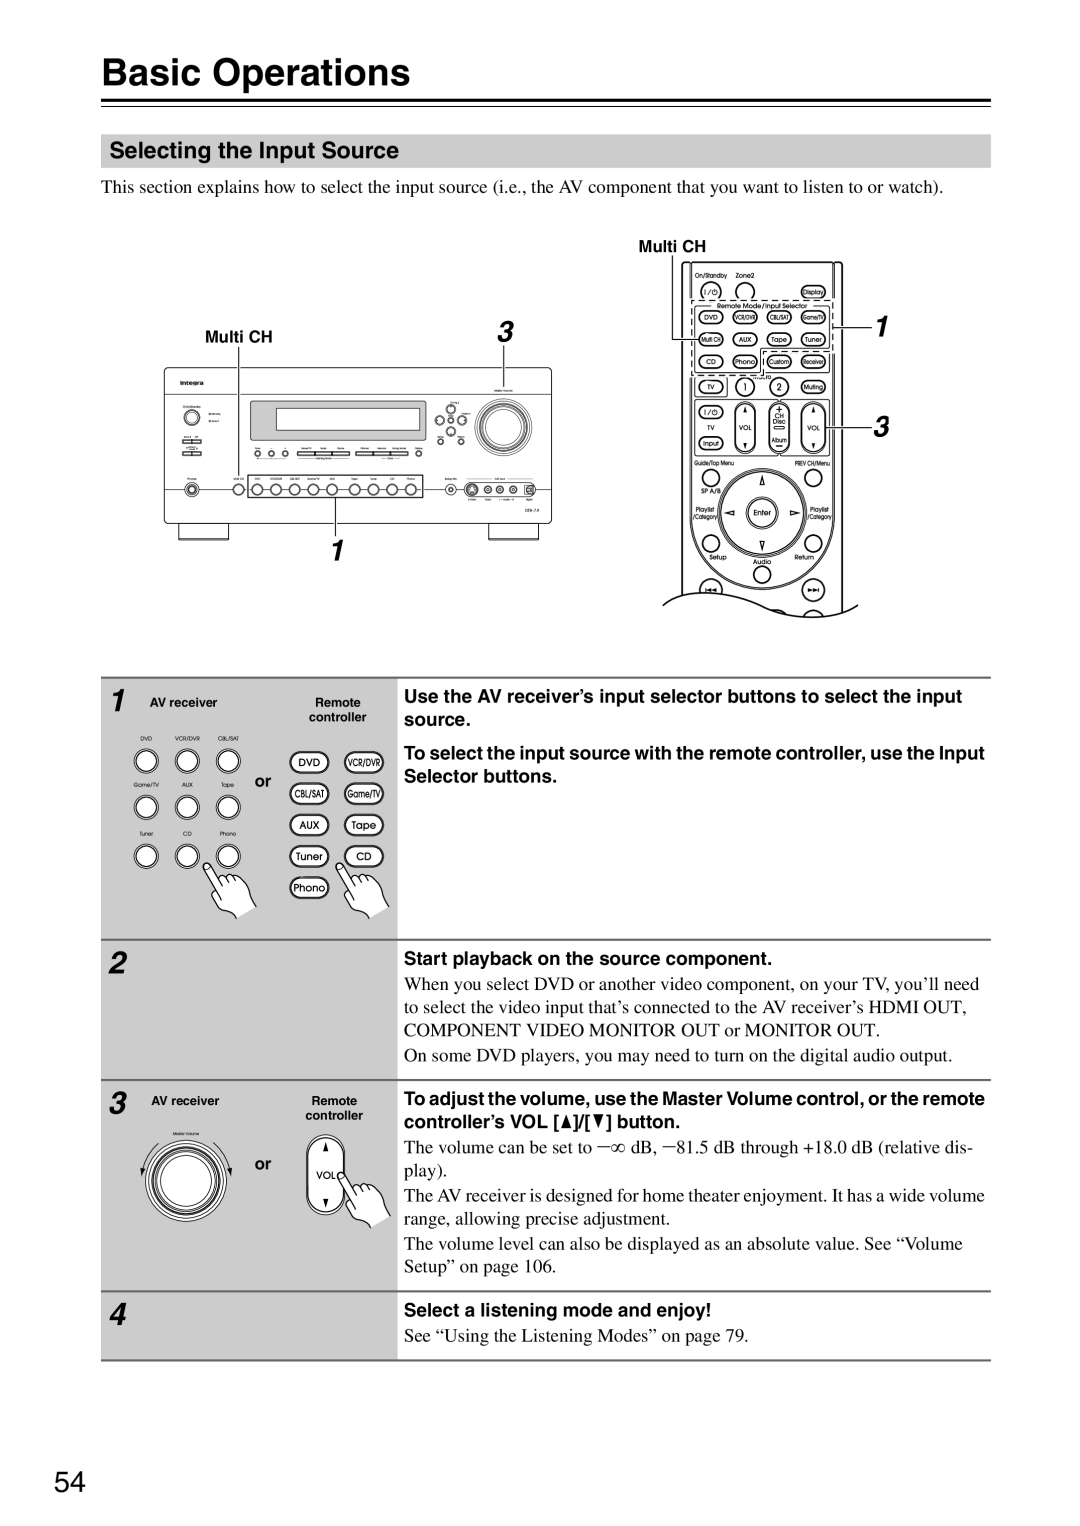 Onkyo DTR-7.9 instruction manual Basic Operations, Selecting the Input Source 